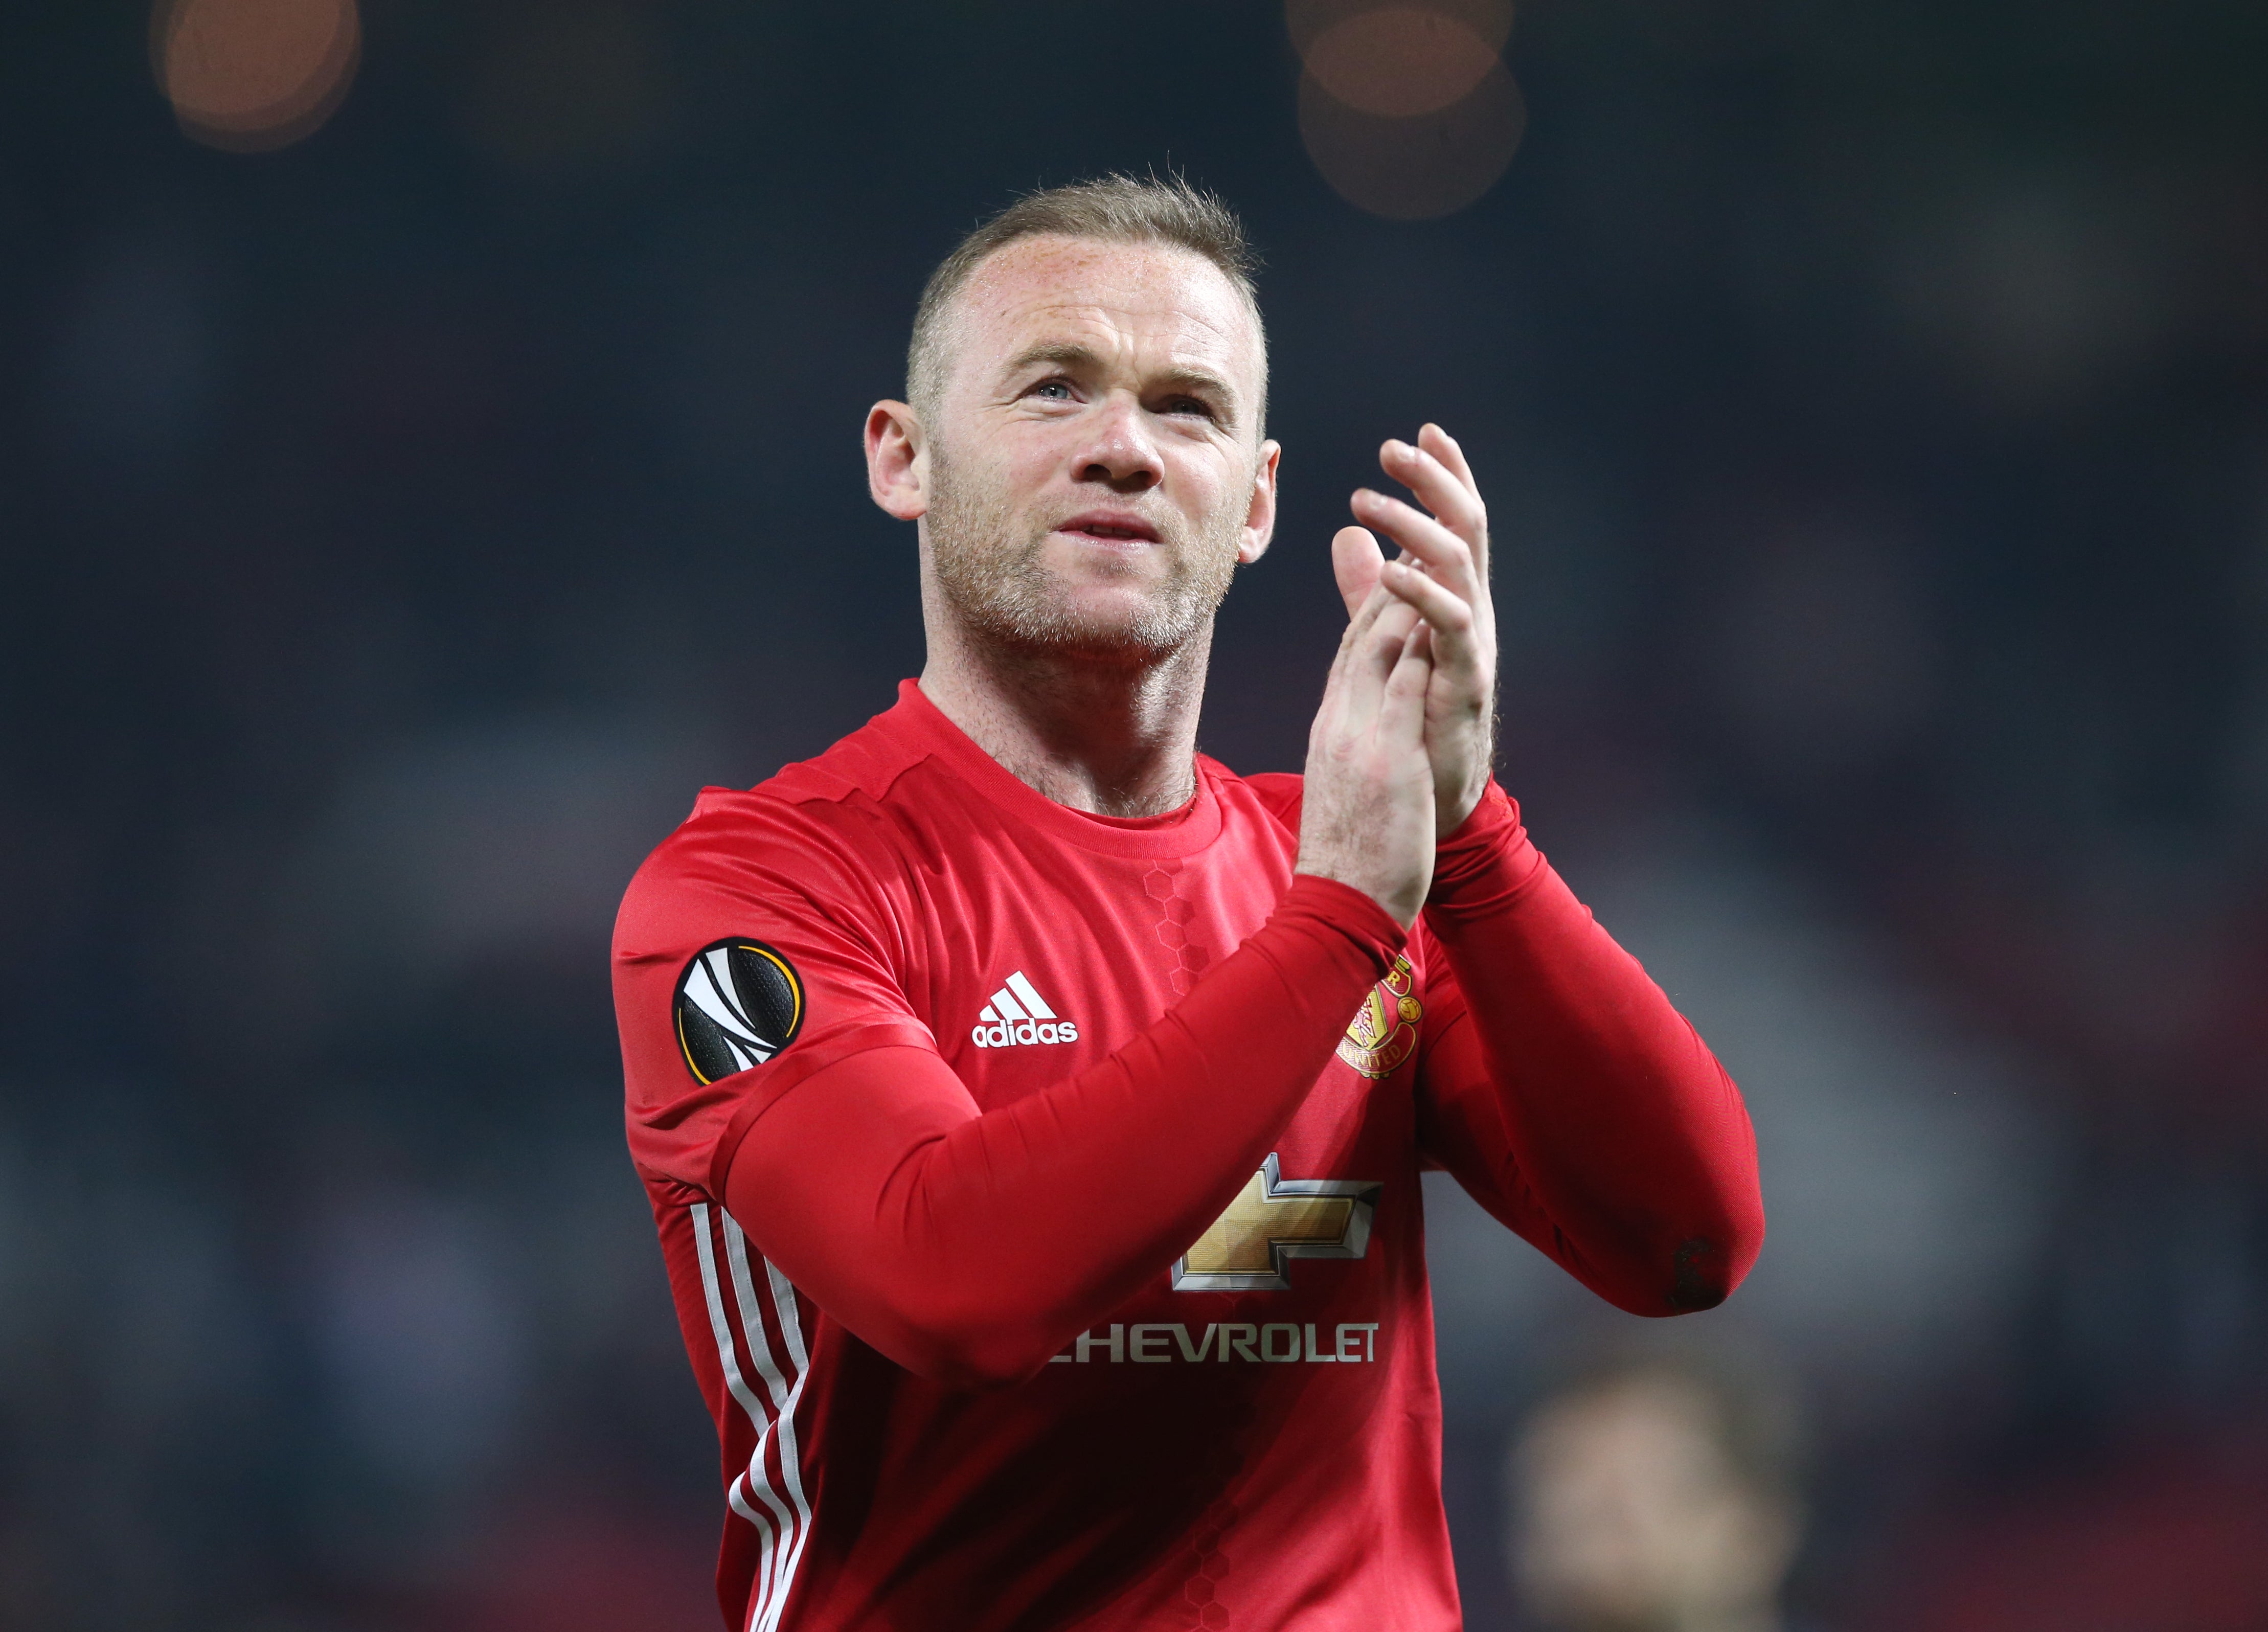 Wayne Rooney: 'For long periods in my career I was suffering inside'